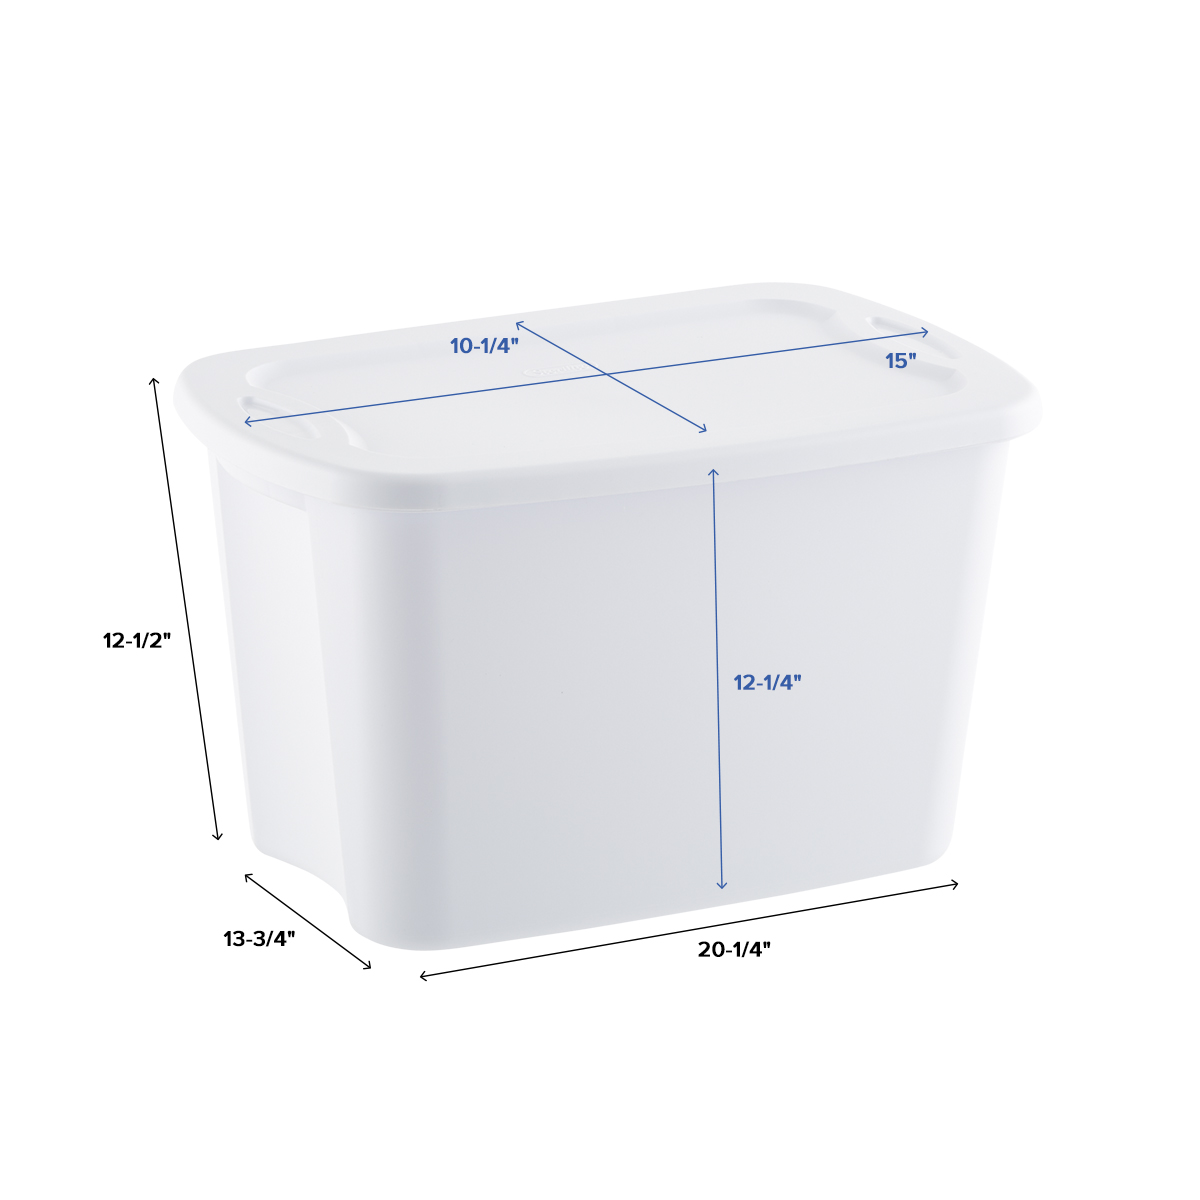 https://www.containerstore.com/catalogimages/478464/10074440-Stacker-Tote_10gal-White.jpg